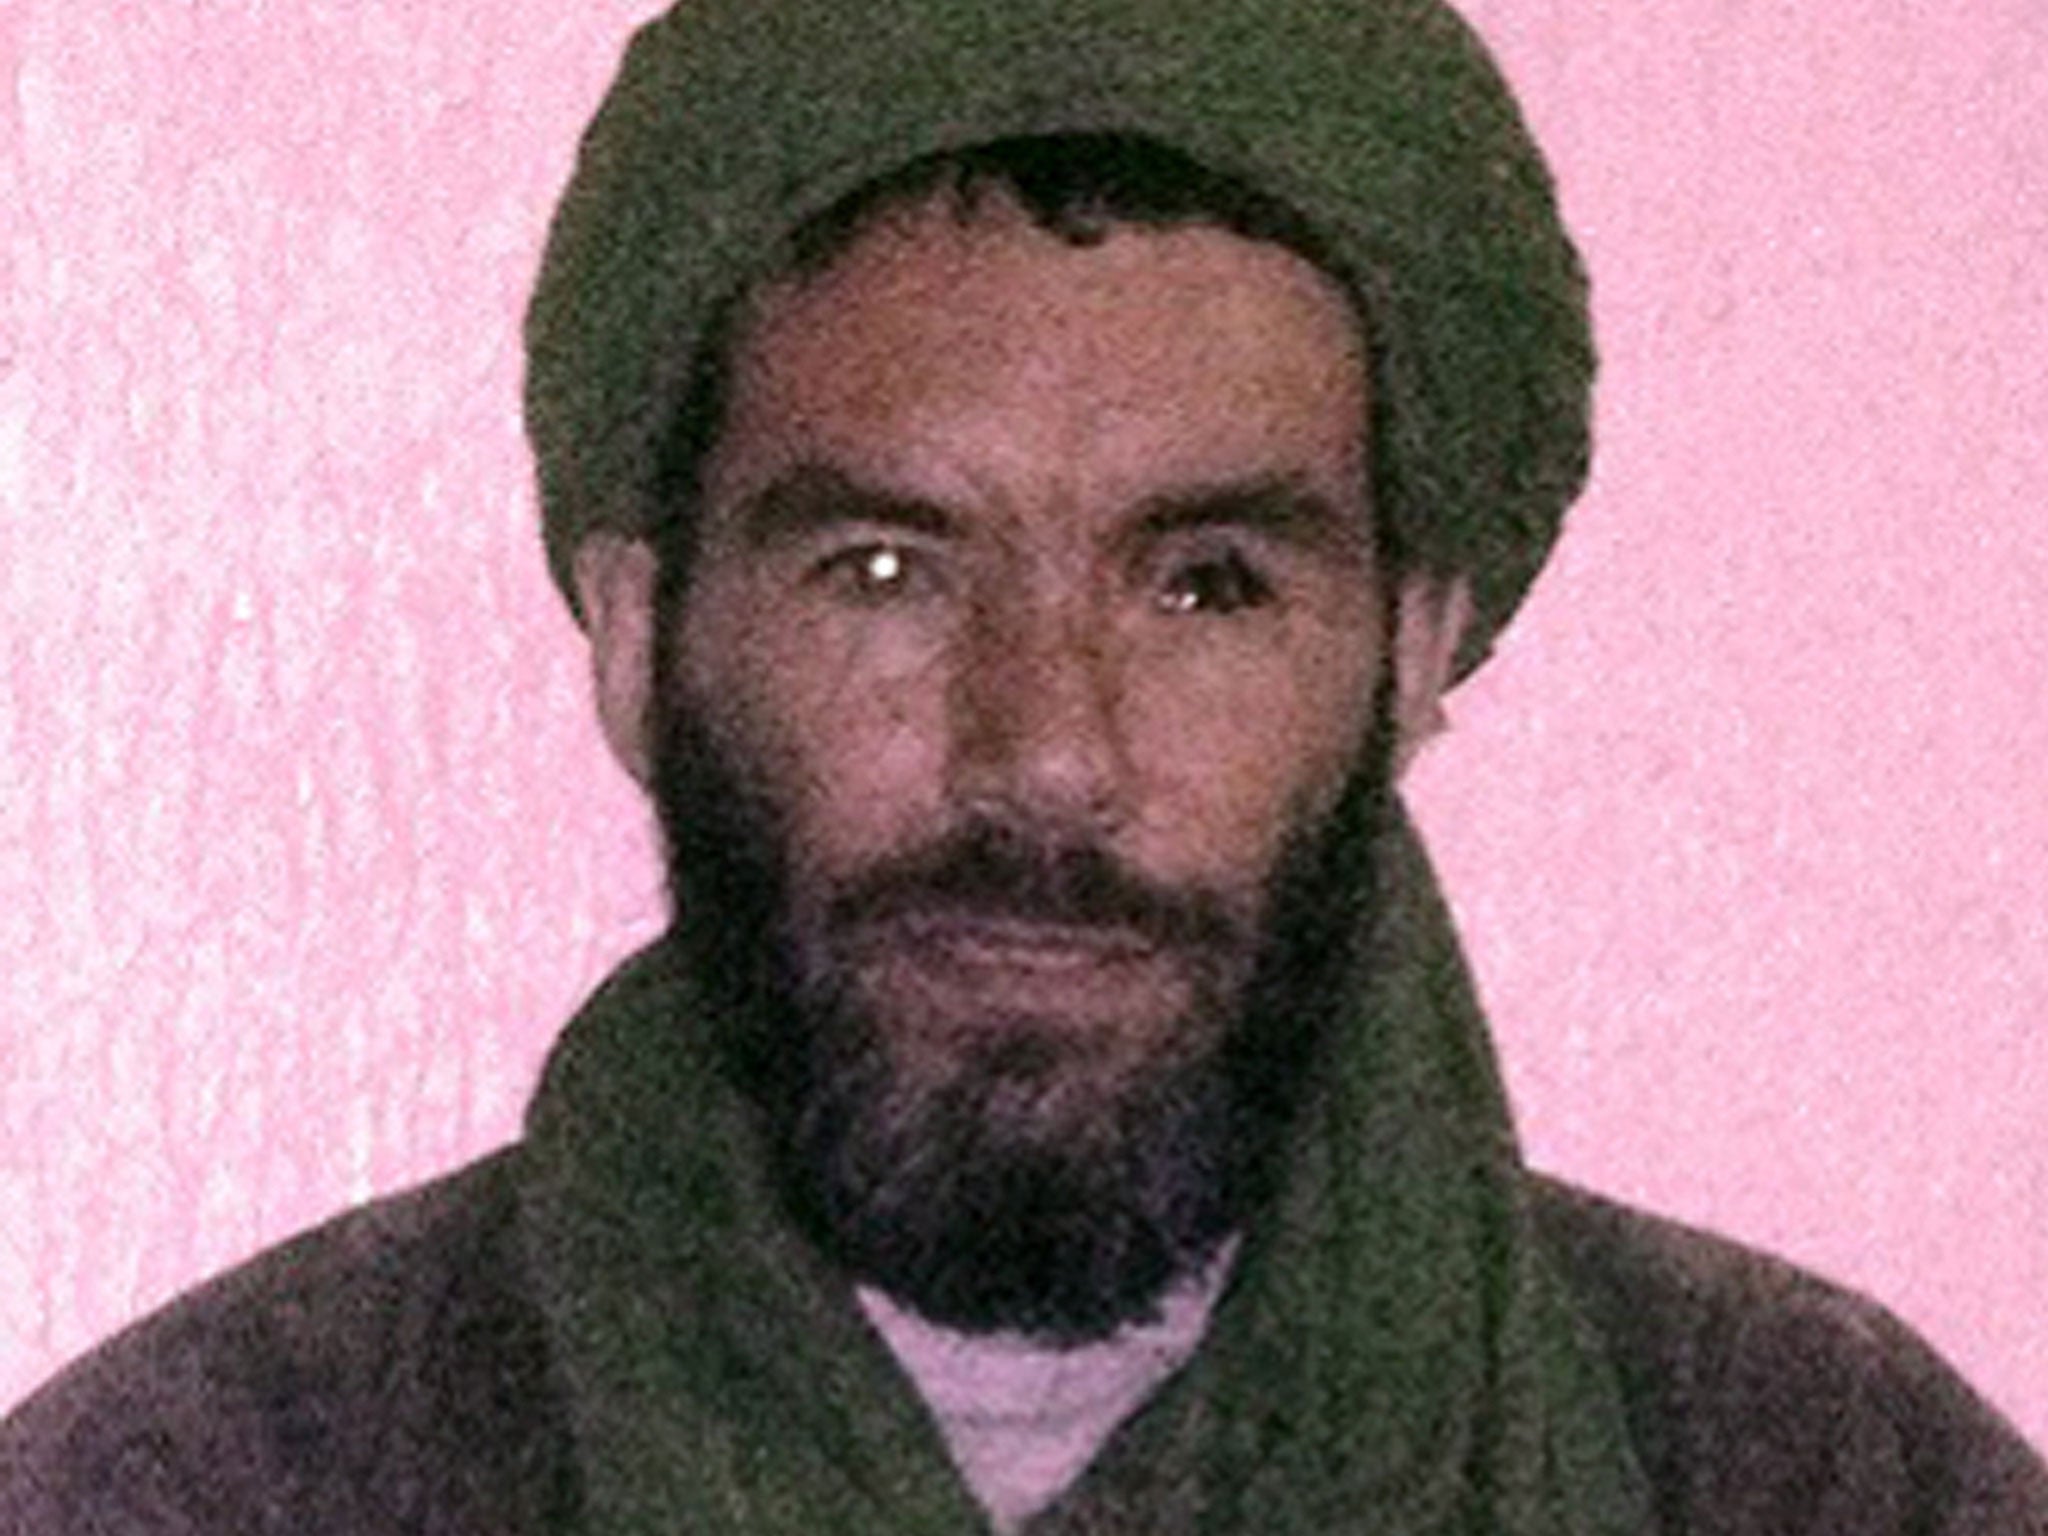 Mokhtar Belmokhtar in an undisclosed location